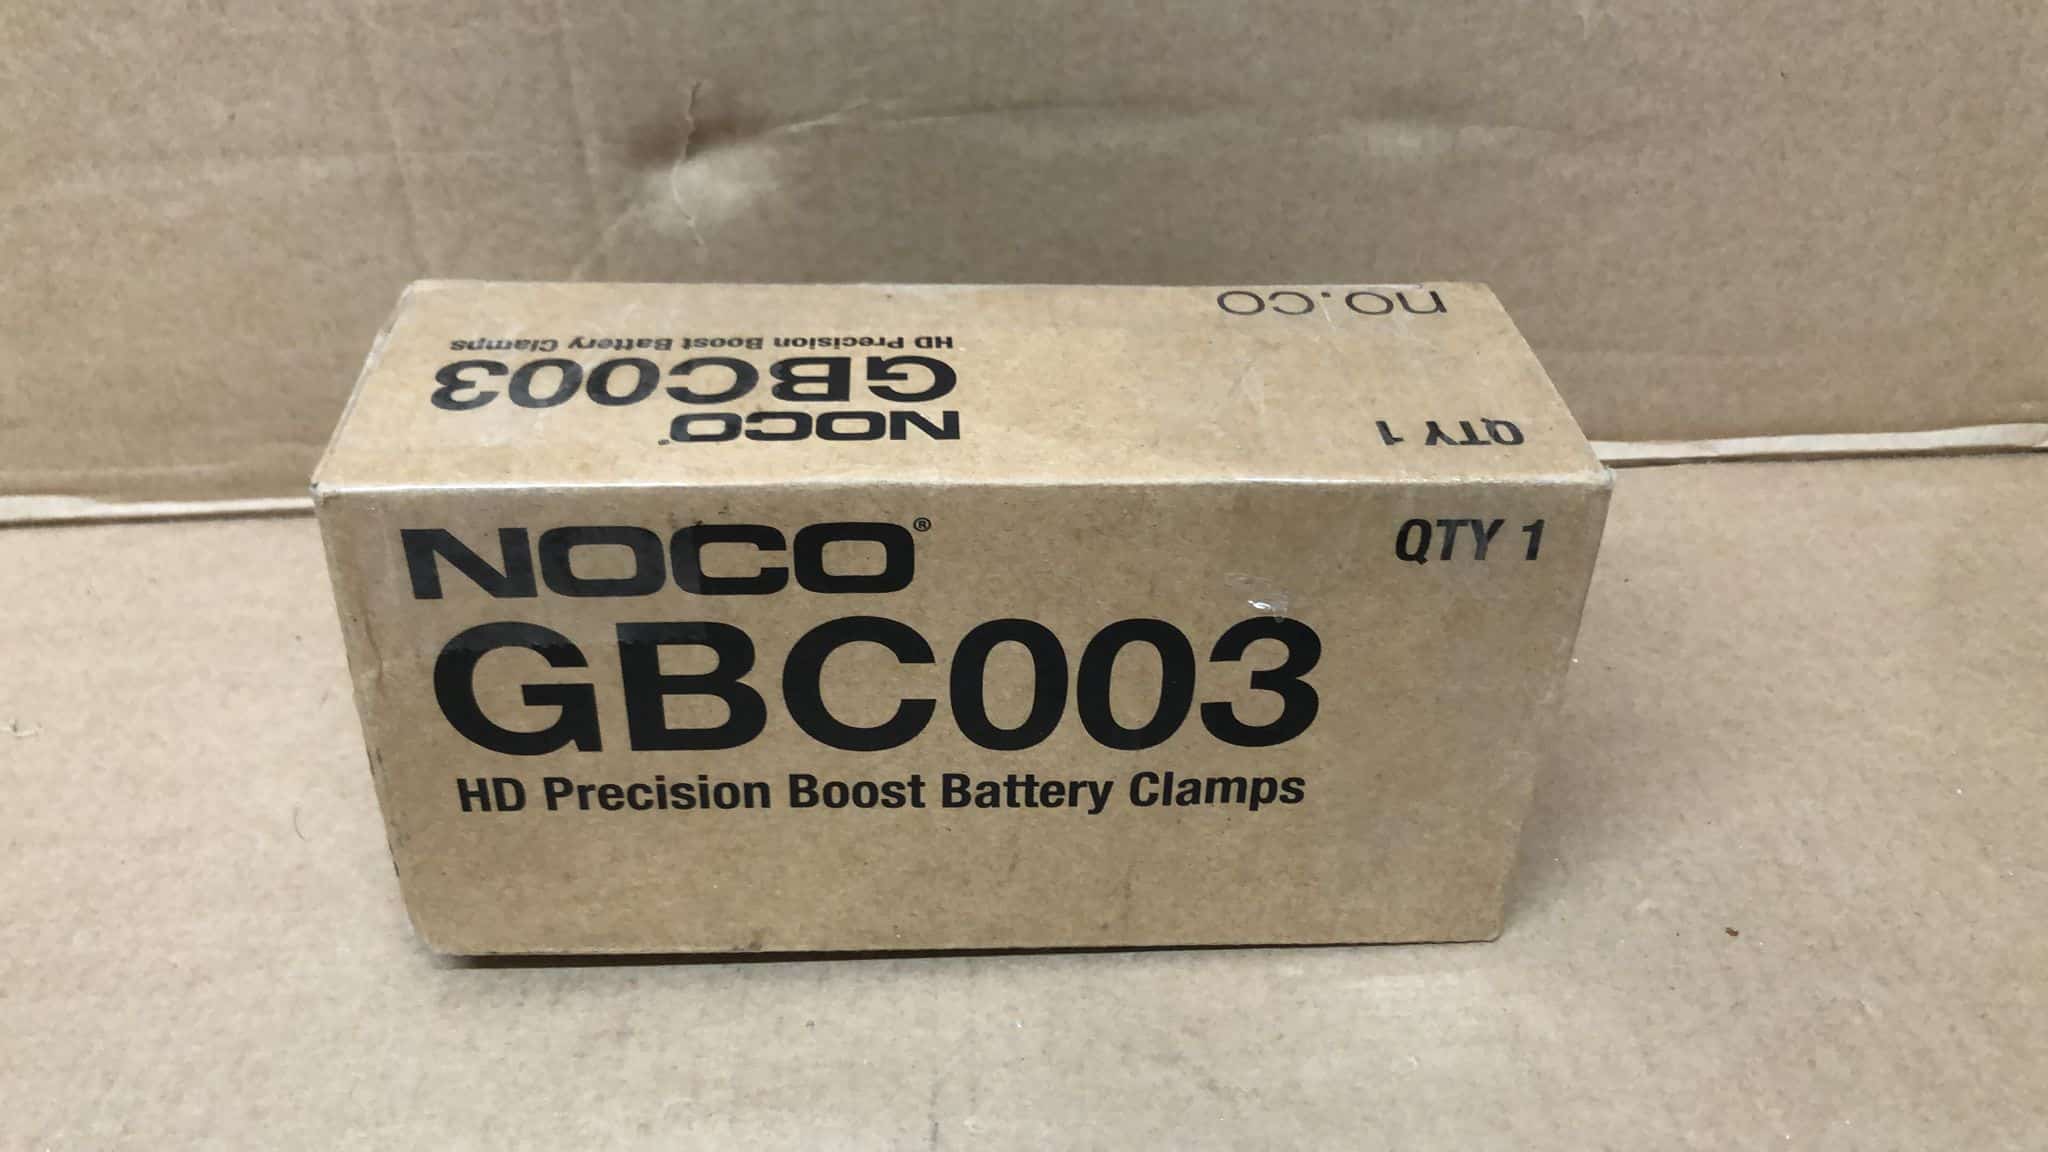 NOCO GBC003 Boost HD Precision Battery Clamps for GB20, GB40, GB50, and GBX45 UltraSafe Lithium Jump Starters 9143